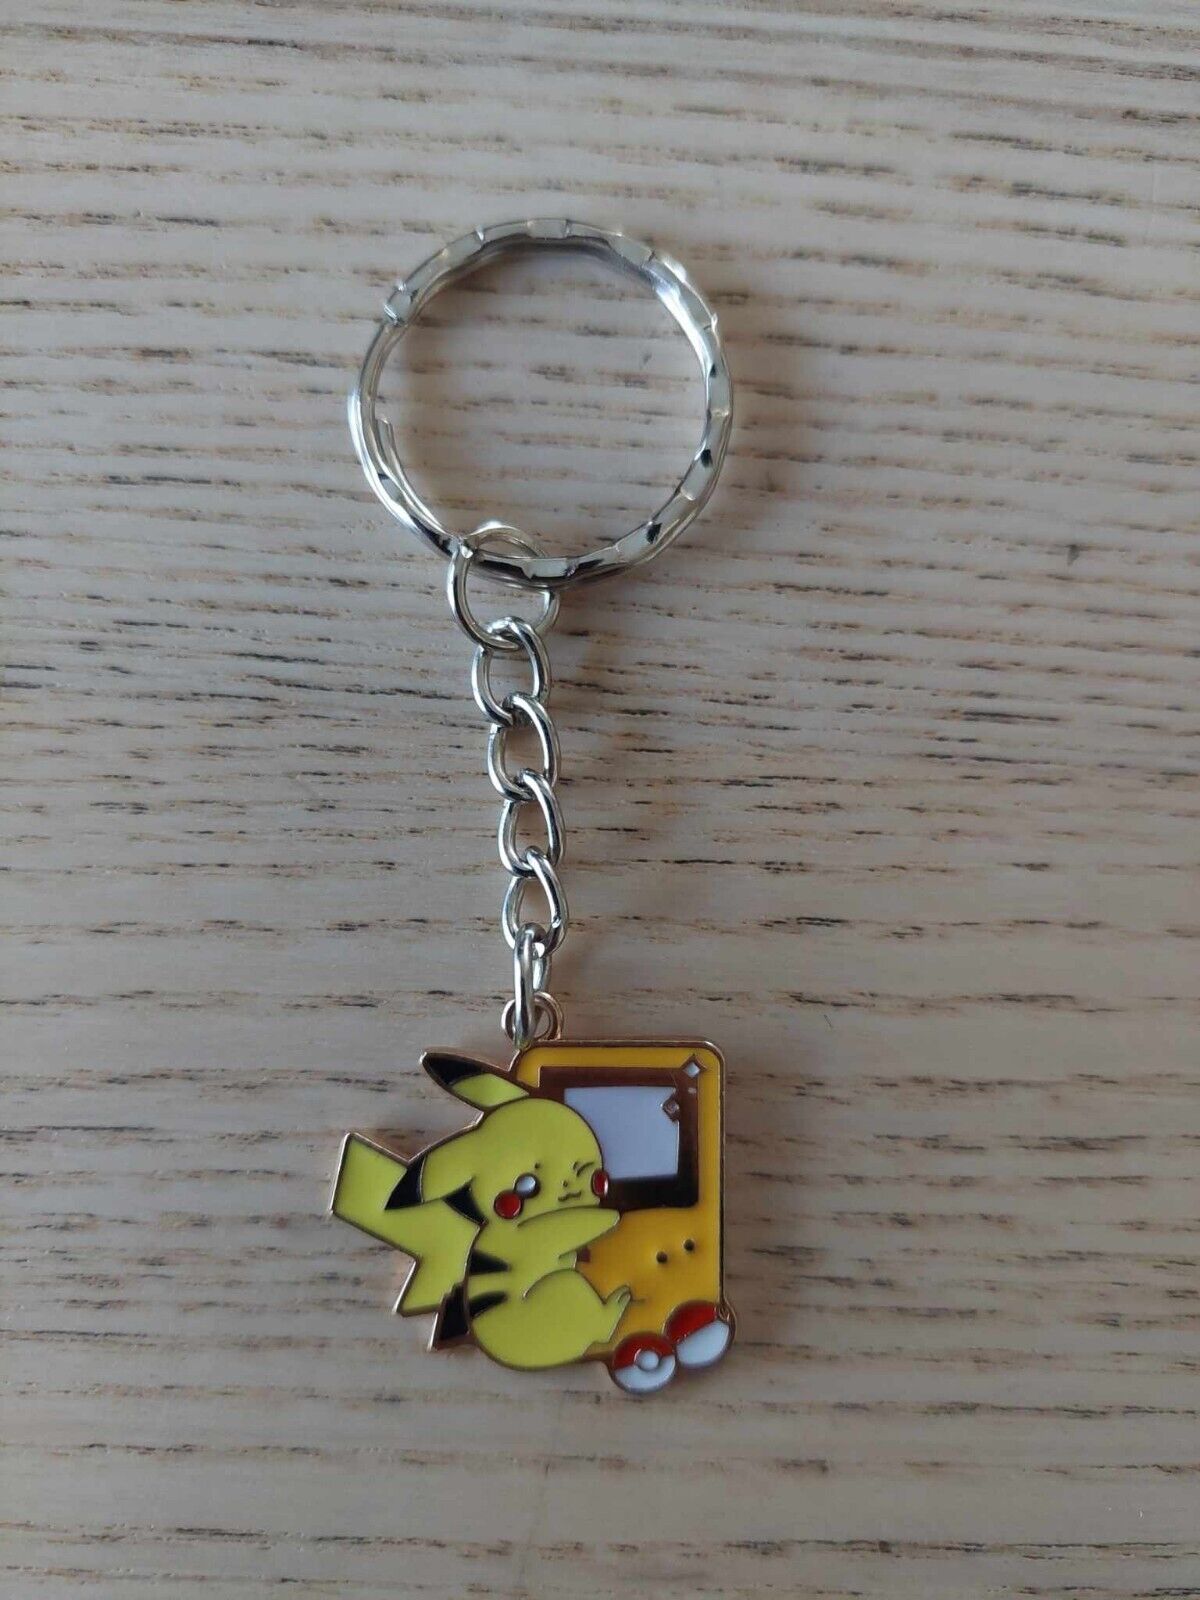 Pokemon Small Metal Keychains 8 Variations Buy One Get One Free (Add 2 to Cart)